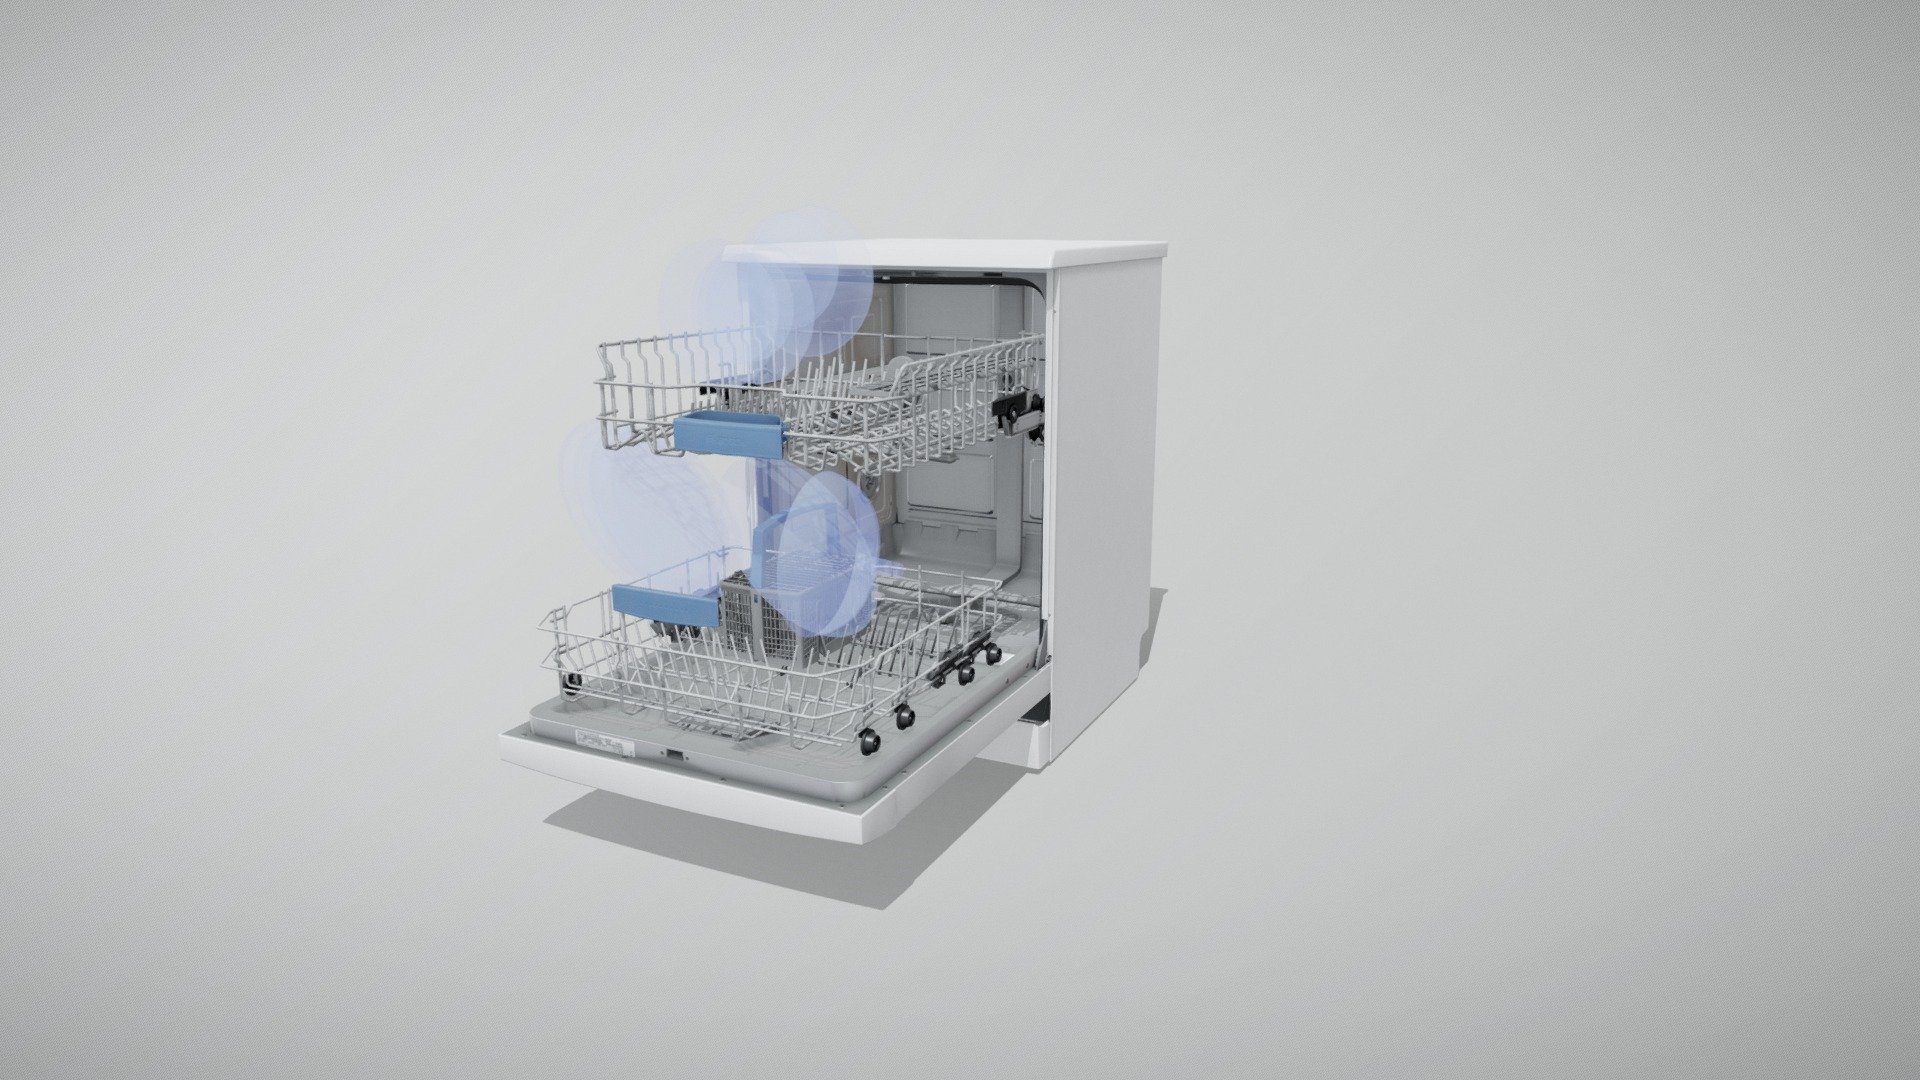 Dishwasher Bosch Series 2 Silence Plus model
Game and VR ready for high-quality Architectural Visualization - Dishwasher Bosch Series 2 Silence Plus - 3D model by Invrsion 3d model